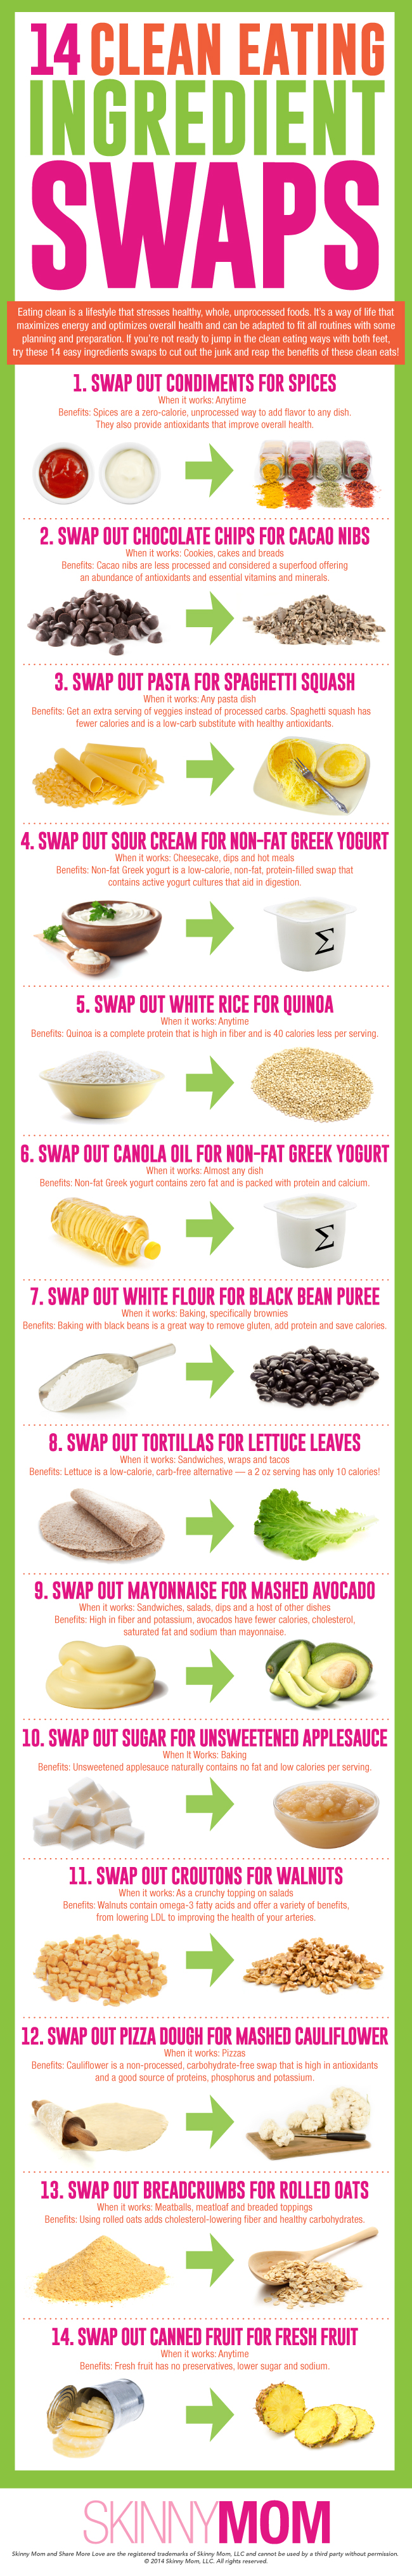 14 Clean Eating Ingredient Swaps For All Your Culinary Needs Infographic